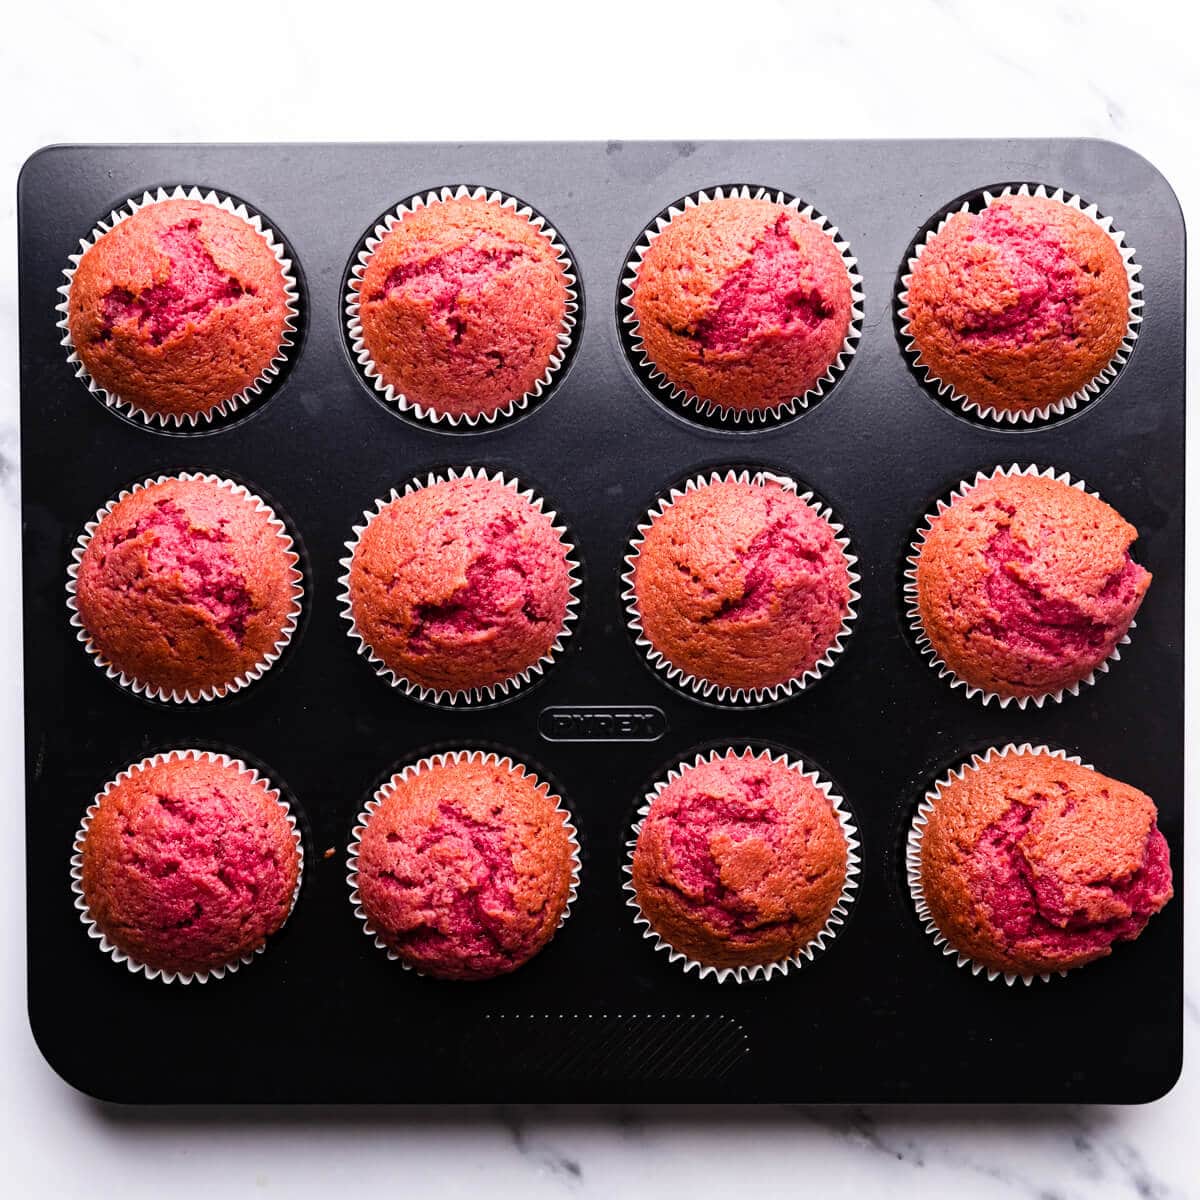 baked raspberry cupcakes inside of the baking tin.